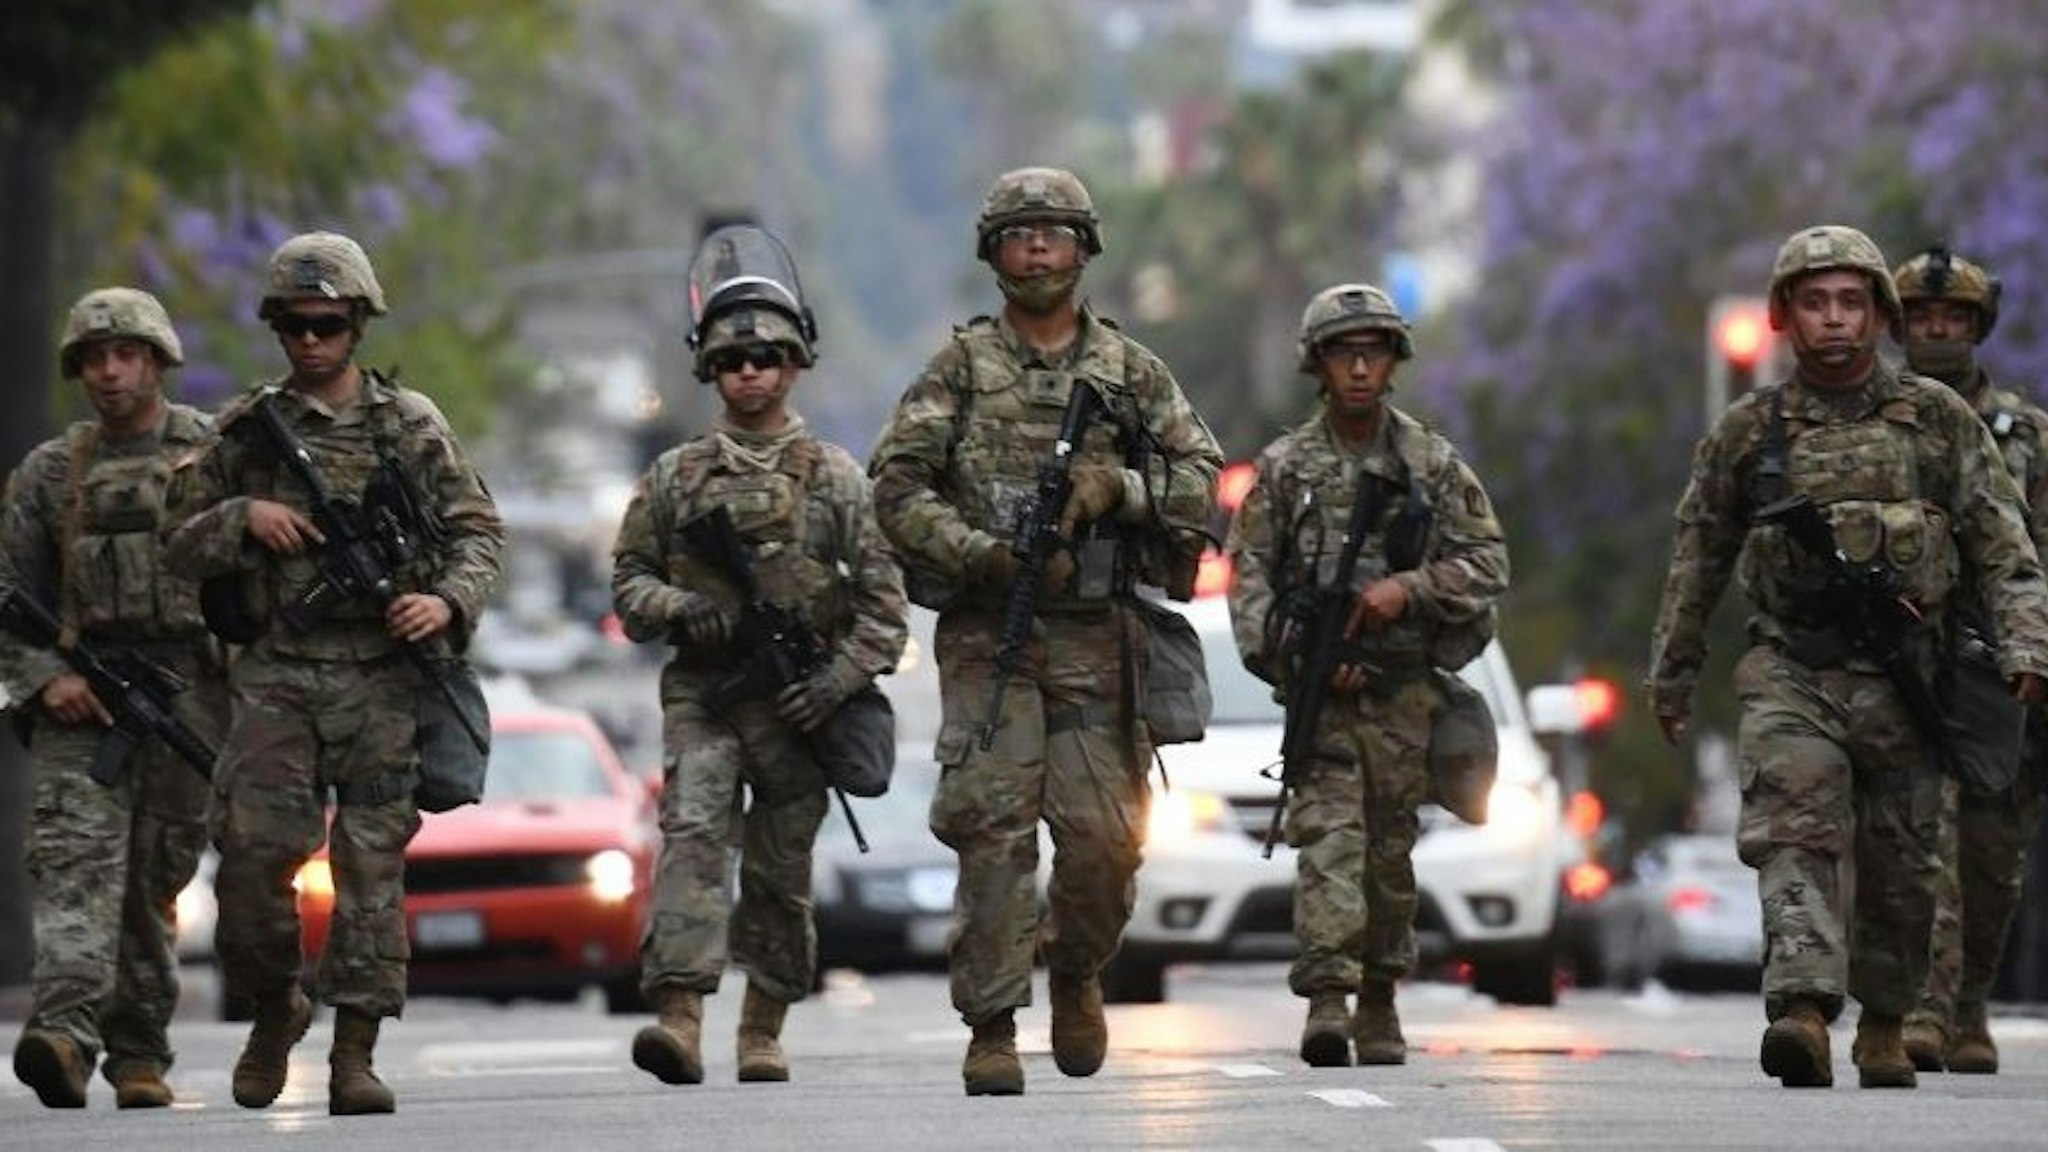 Armed National Guard soldiers patrol on Hollywood Blvd, June 1, 2020 in Hollywood, California as peaceful protests and looting continue in Los Angeles County. - Major US cities -- convulsed by protests, clashes with police and looting since the death in Minneapolis police custody of George Floyd a week ago -- braced Monday for another night of unrest. More than 40 cities have imposed curfews after consecutive nights of tension that included looting and the trashing of parked cars. (Photo by Robyn Beck / AFP) (Photo by